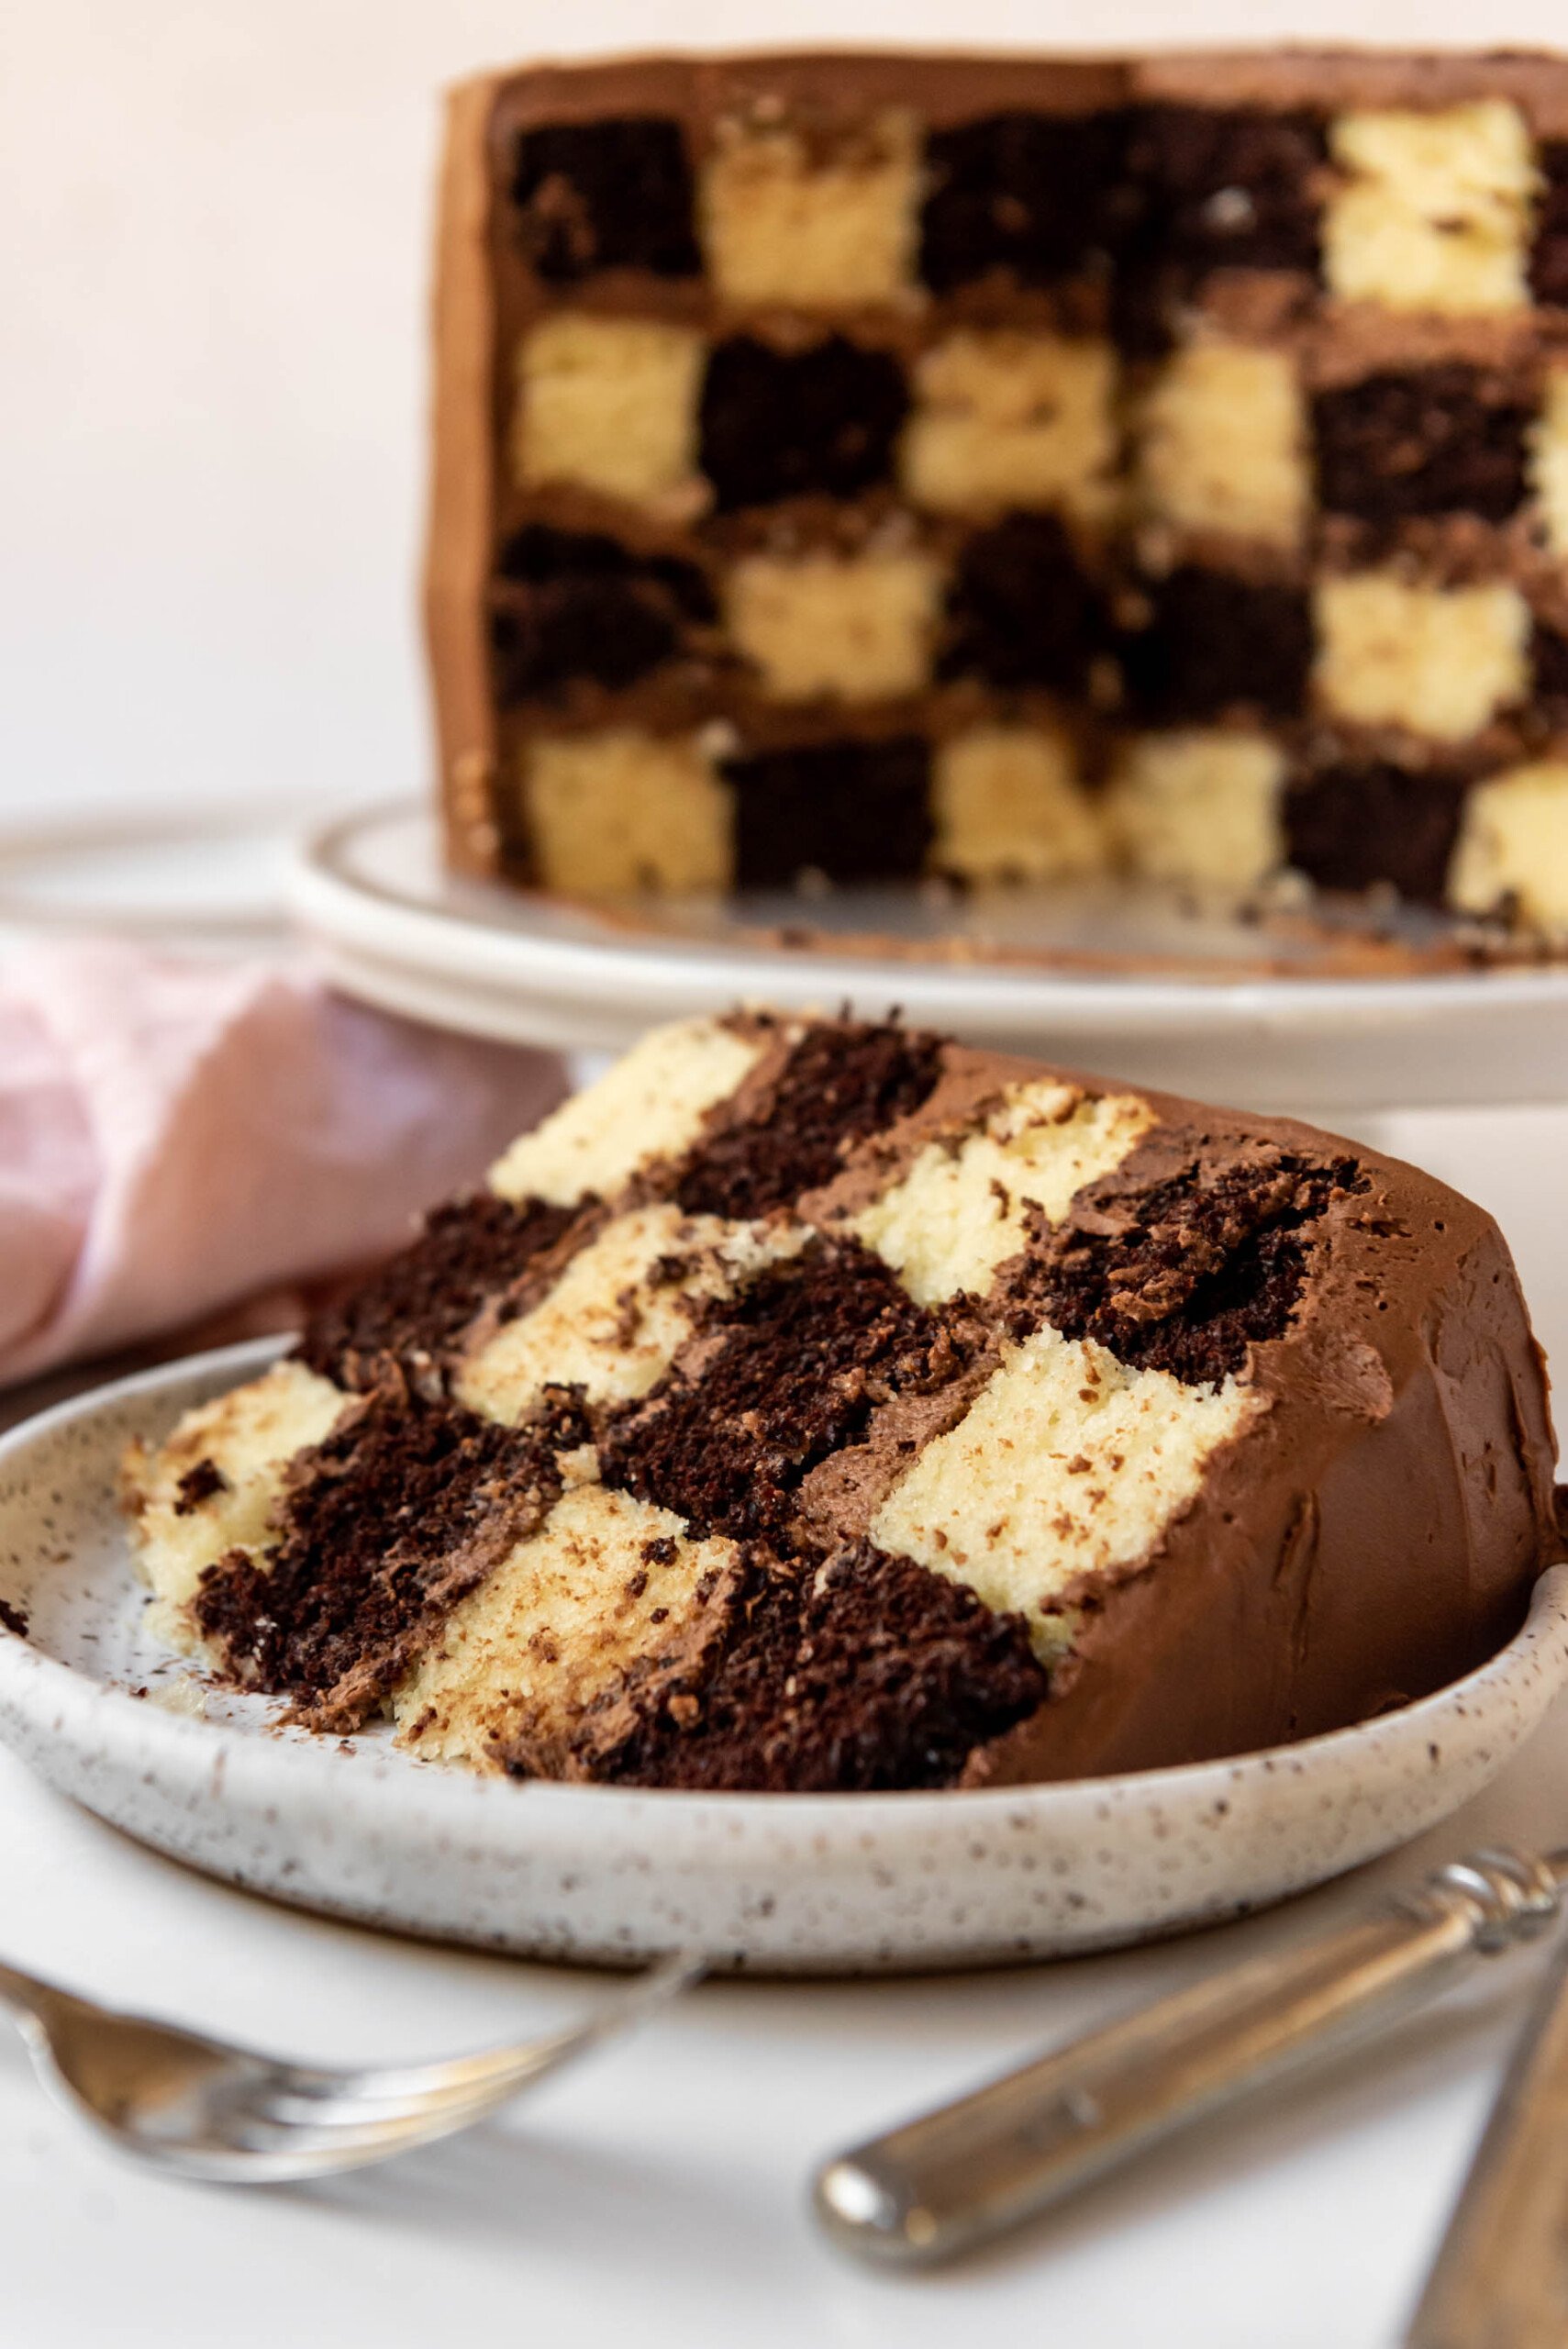 A slice of vanilla and chocolate checkerboard cake laying on its side.